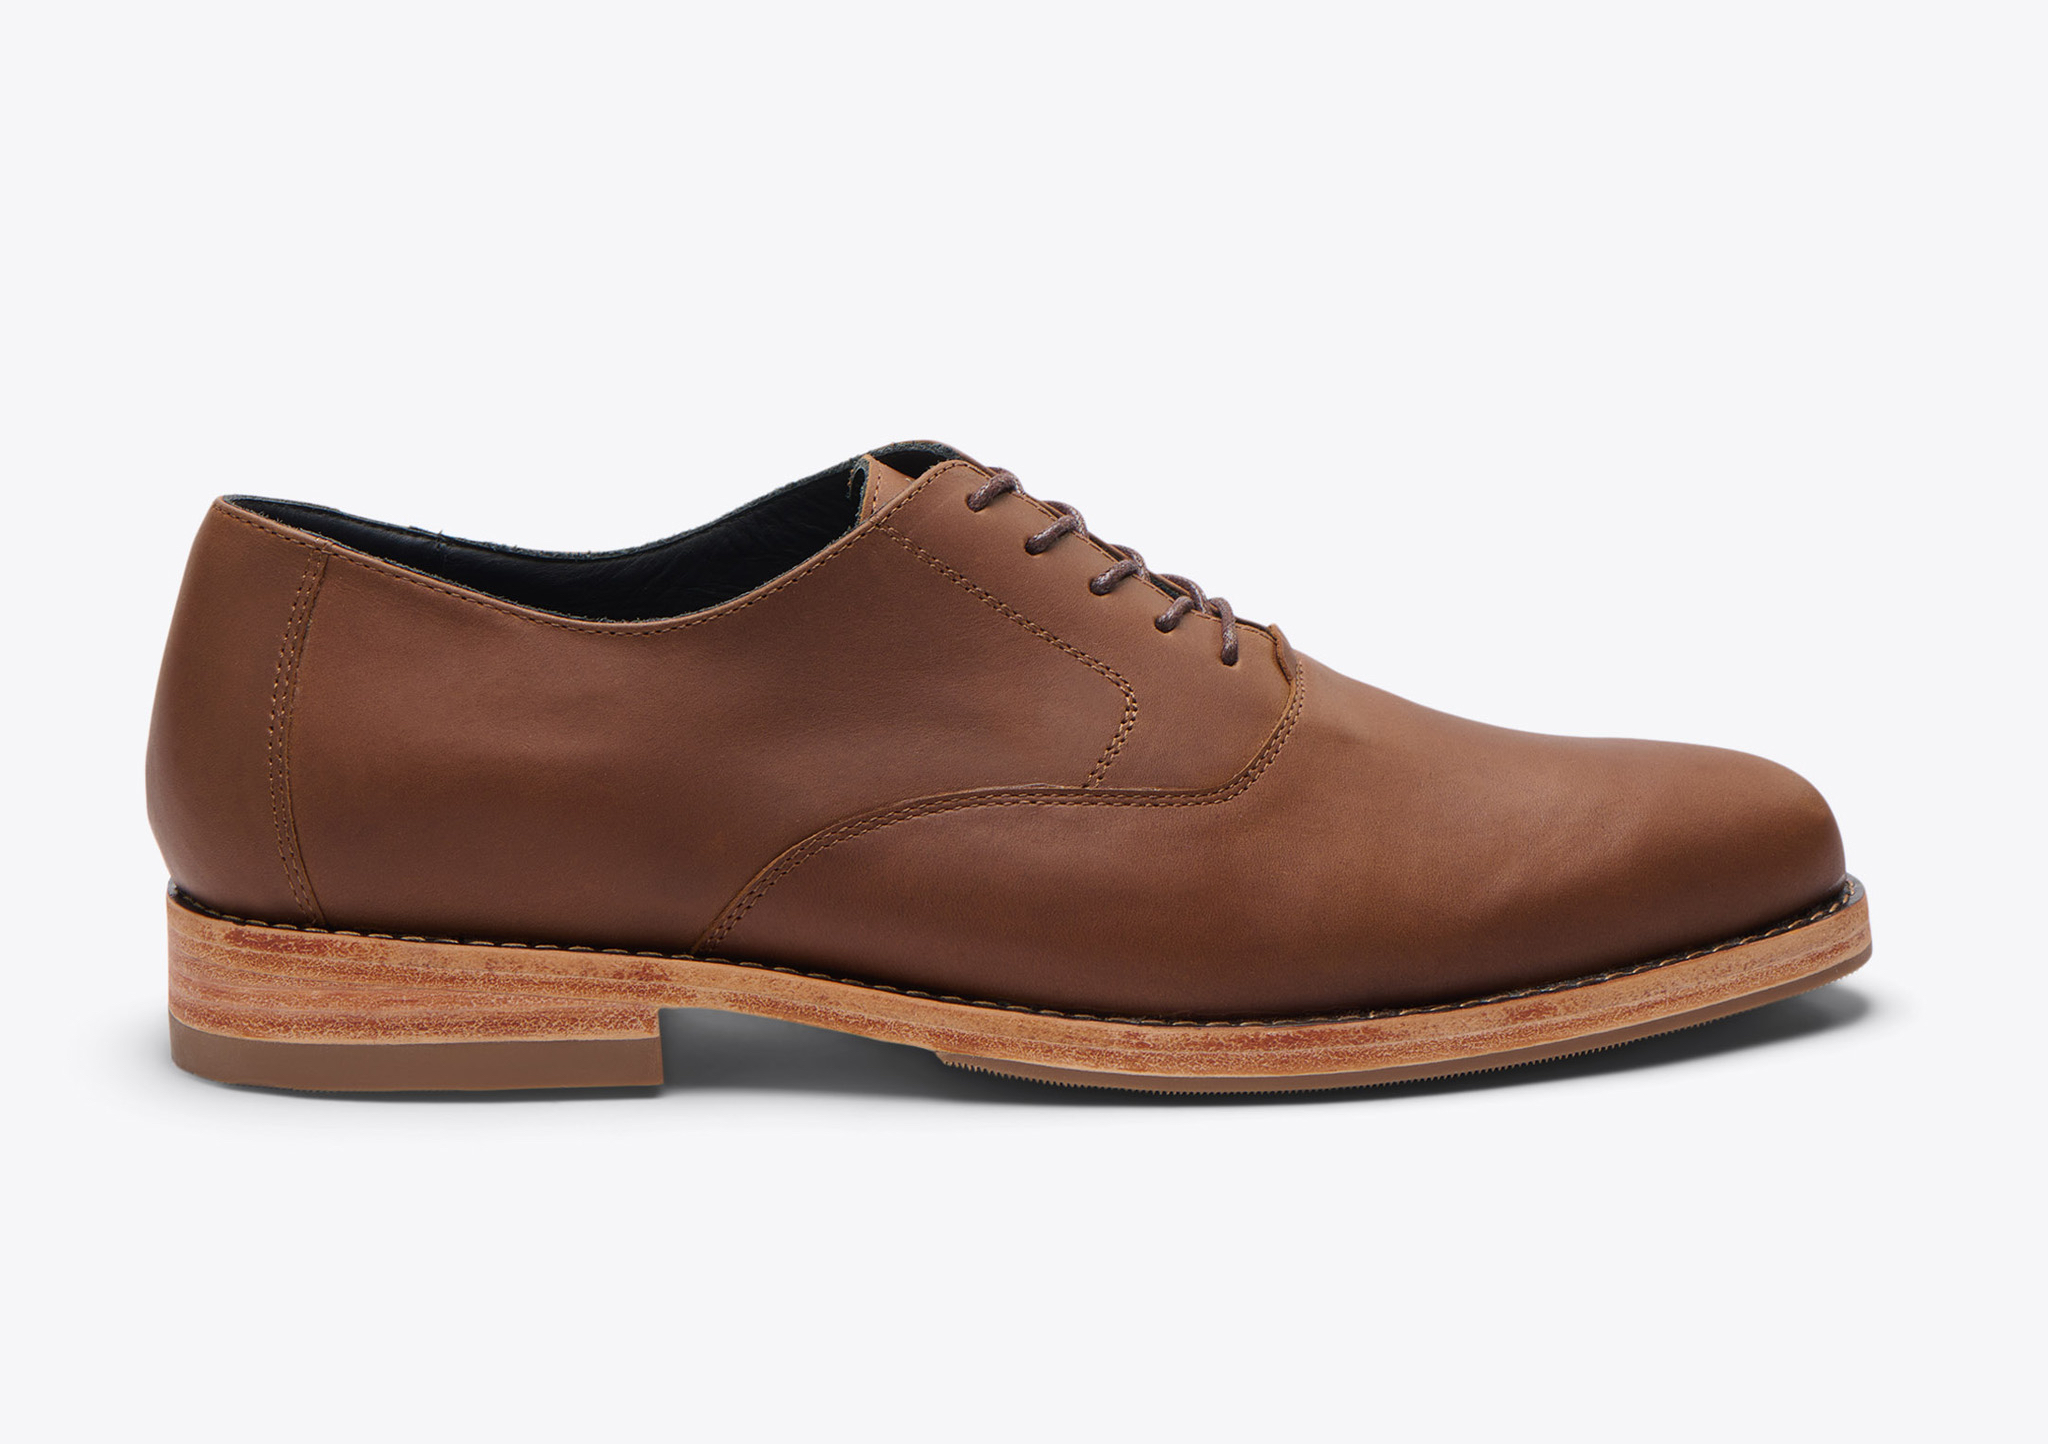 Nisolo Everyday Oxford Brown - Every Nisolo product is built on the foundation of comfort, function, and design. 